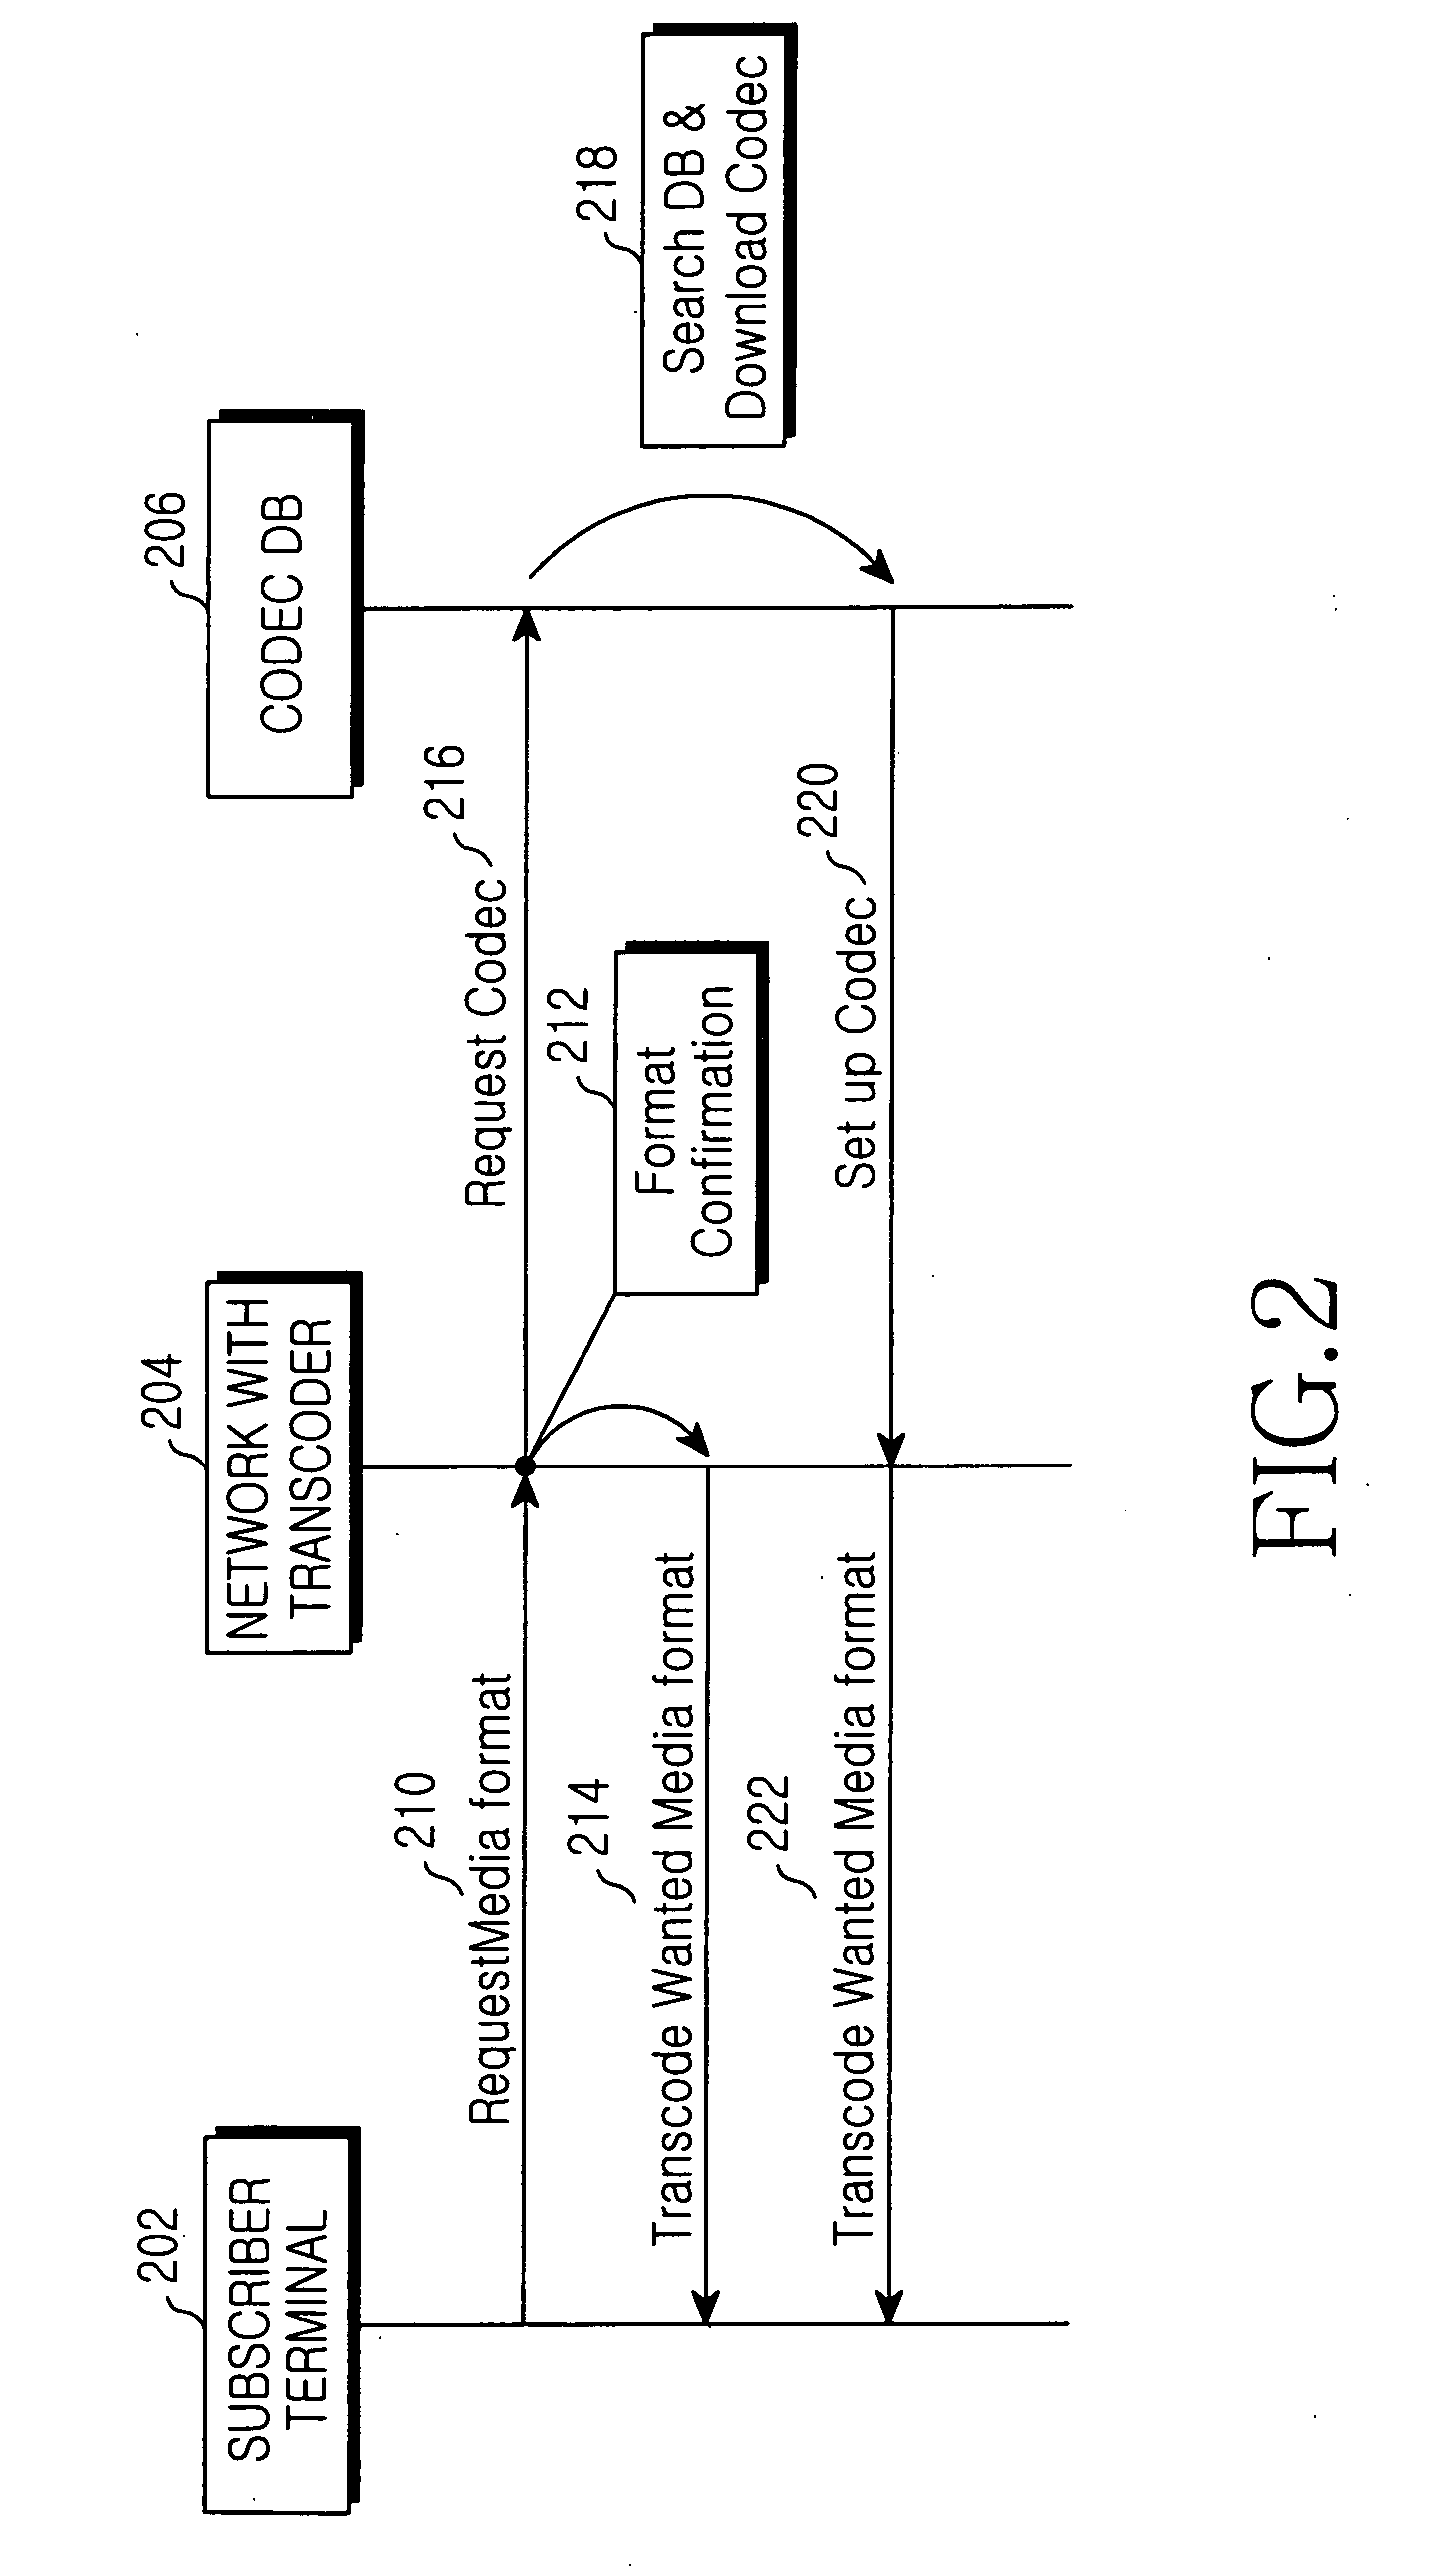 Transcoding apparatus and method for distributed multimedia transmission network provided with transcoder